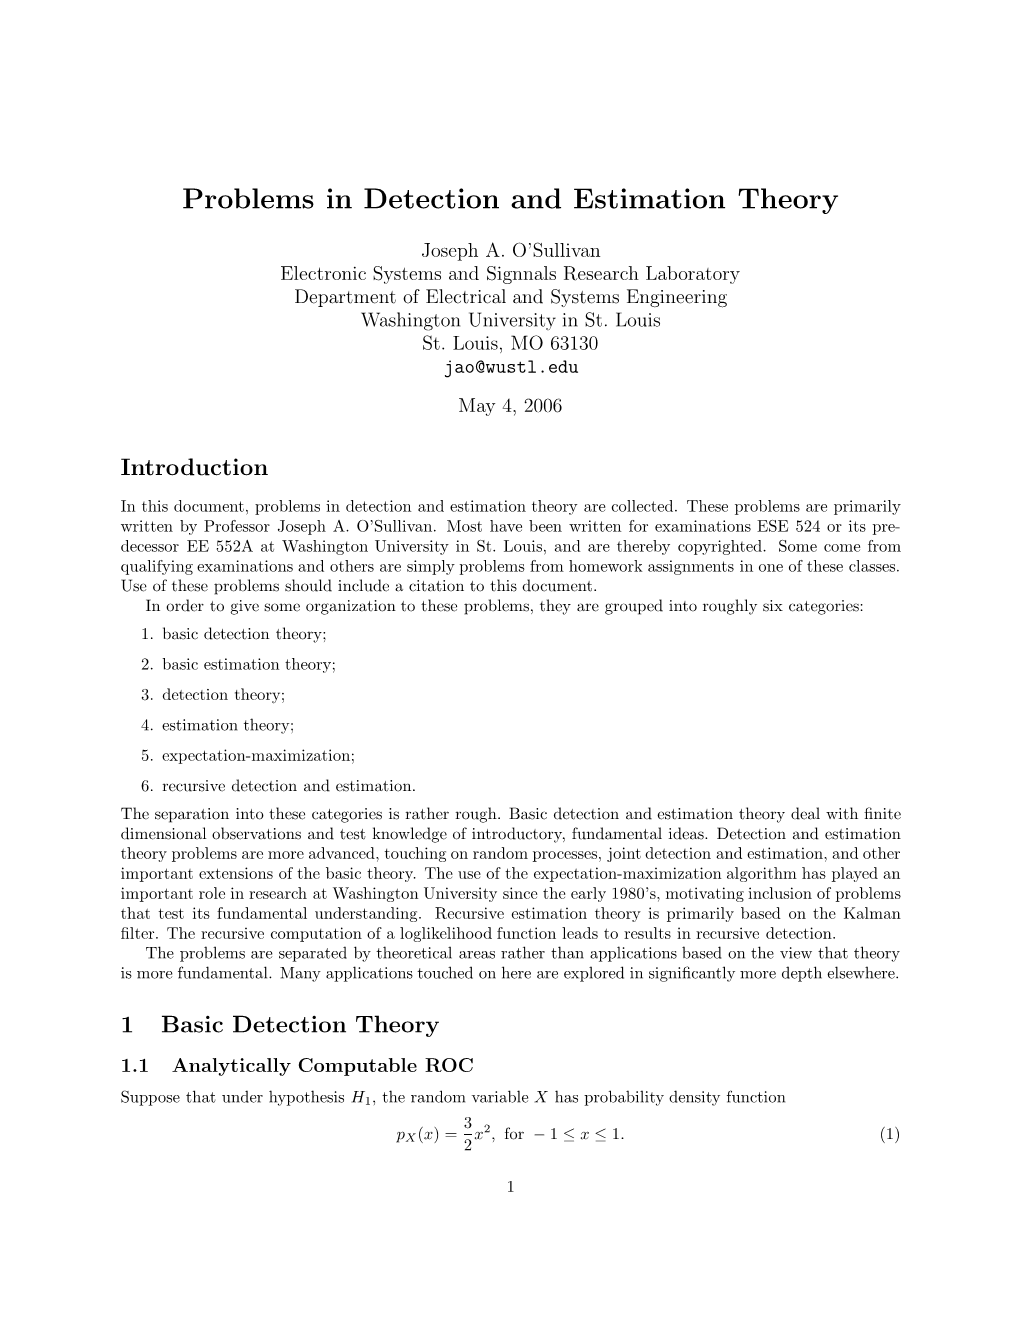 Problems in Detection and Estimation Theory